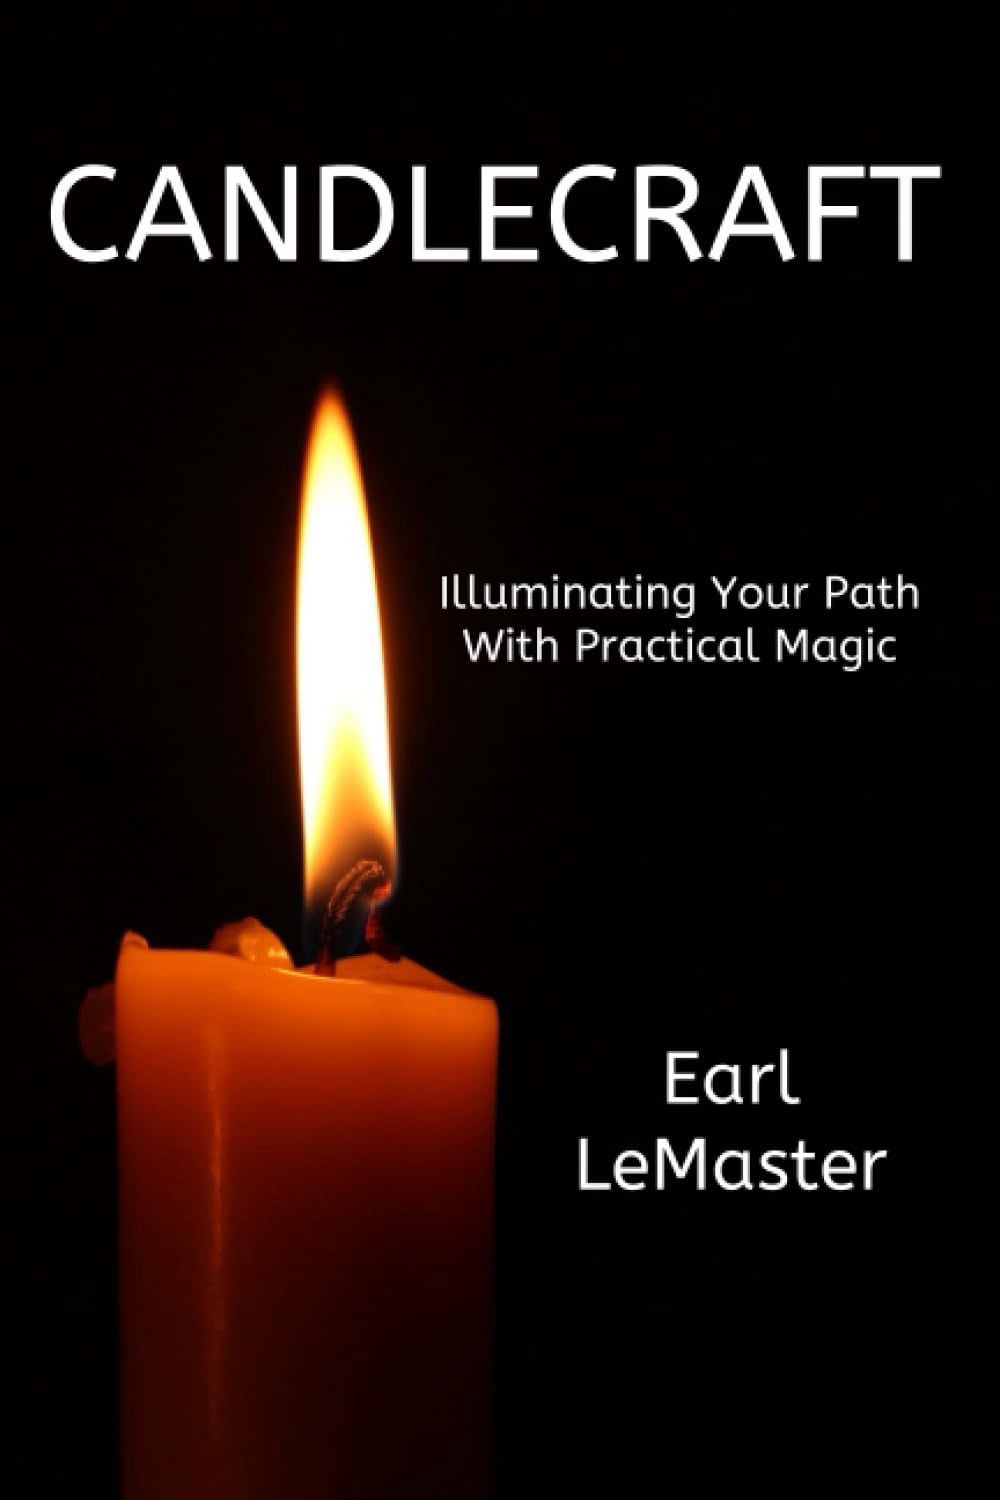 Candlecraft: Illuminating Your Path with Practical Magic